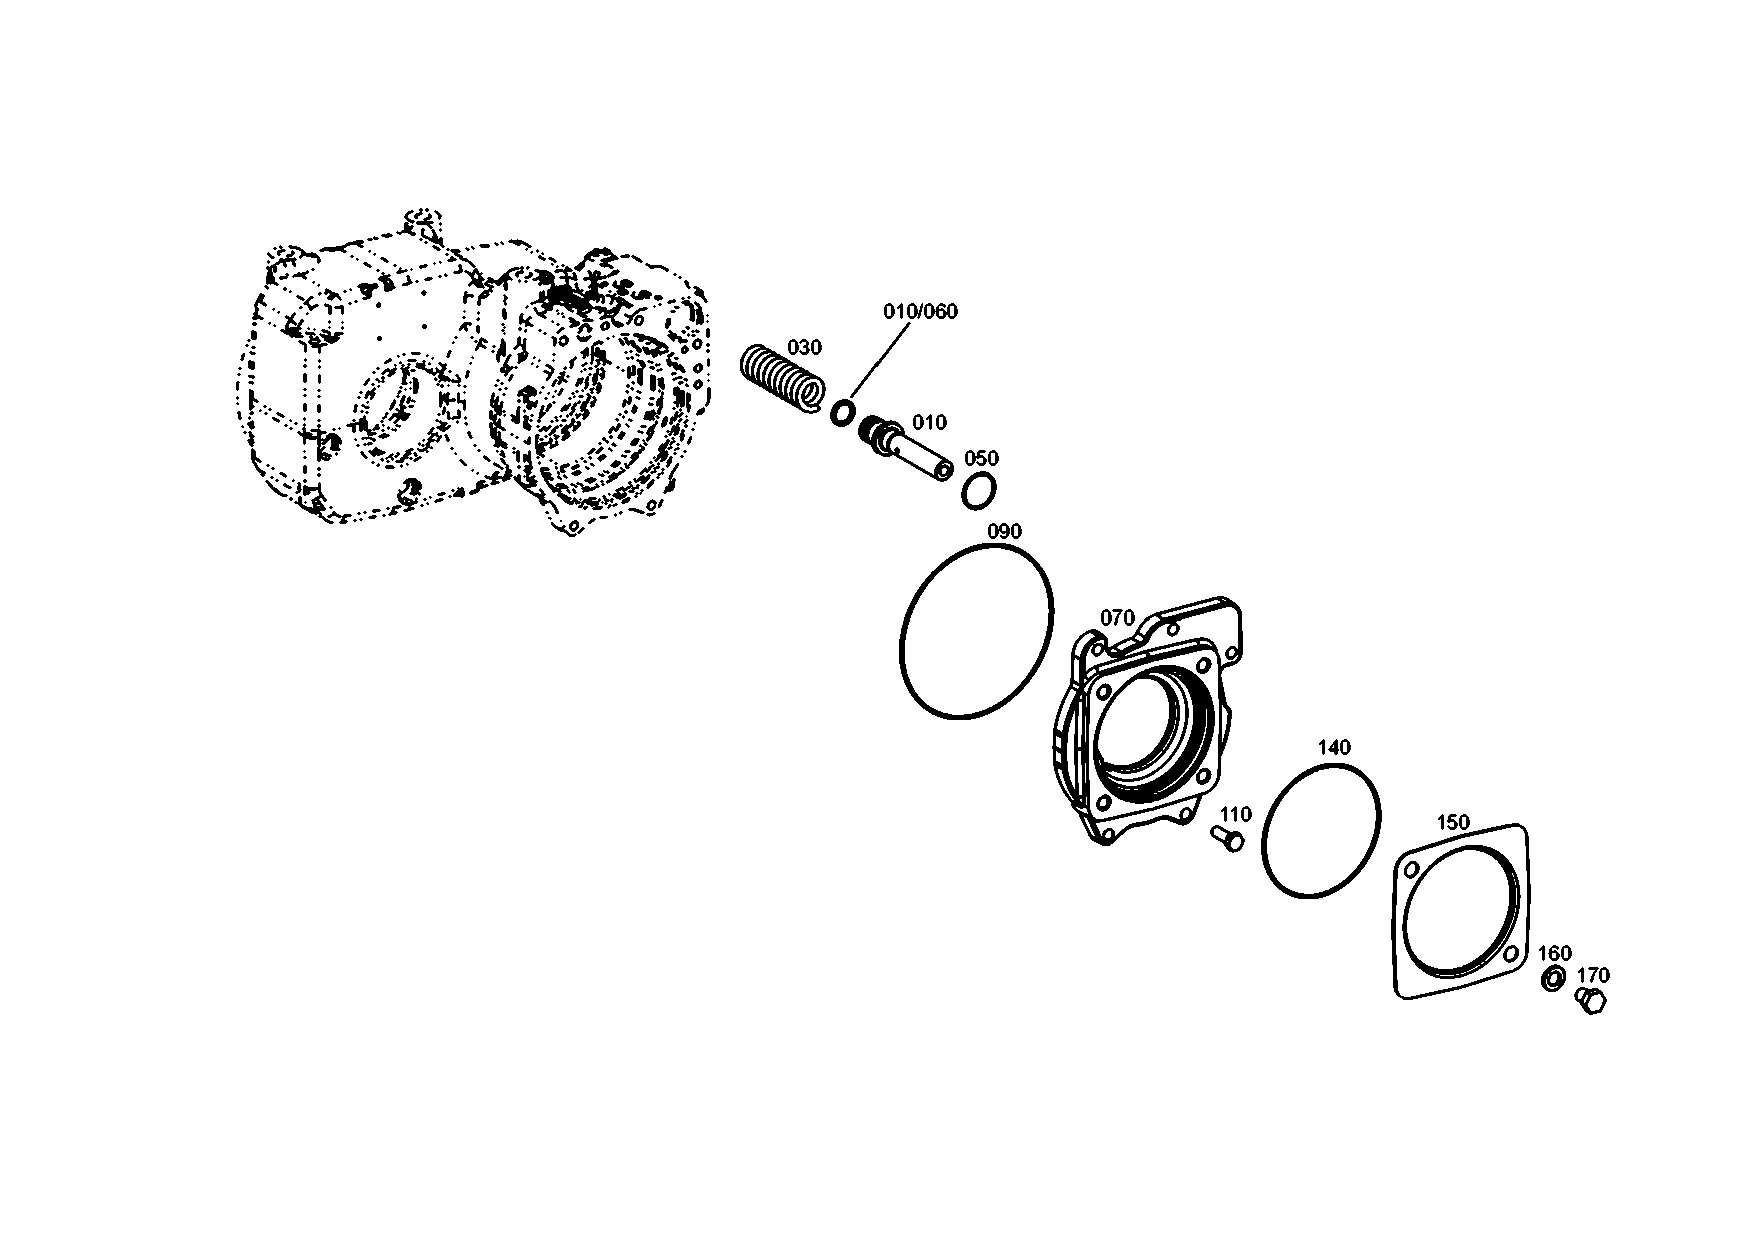 drawing for SENNEBOGEN HYDRAULIKBAGGER GMBH 083793 - COVER (figure 1)